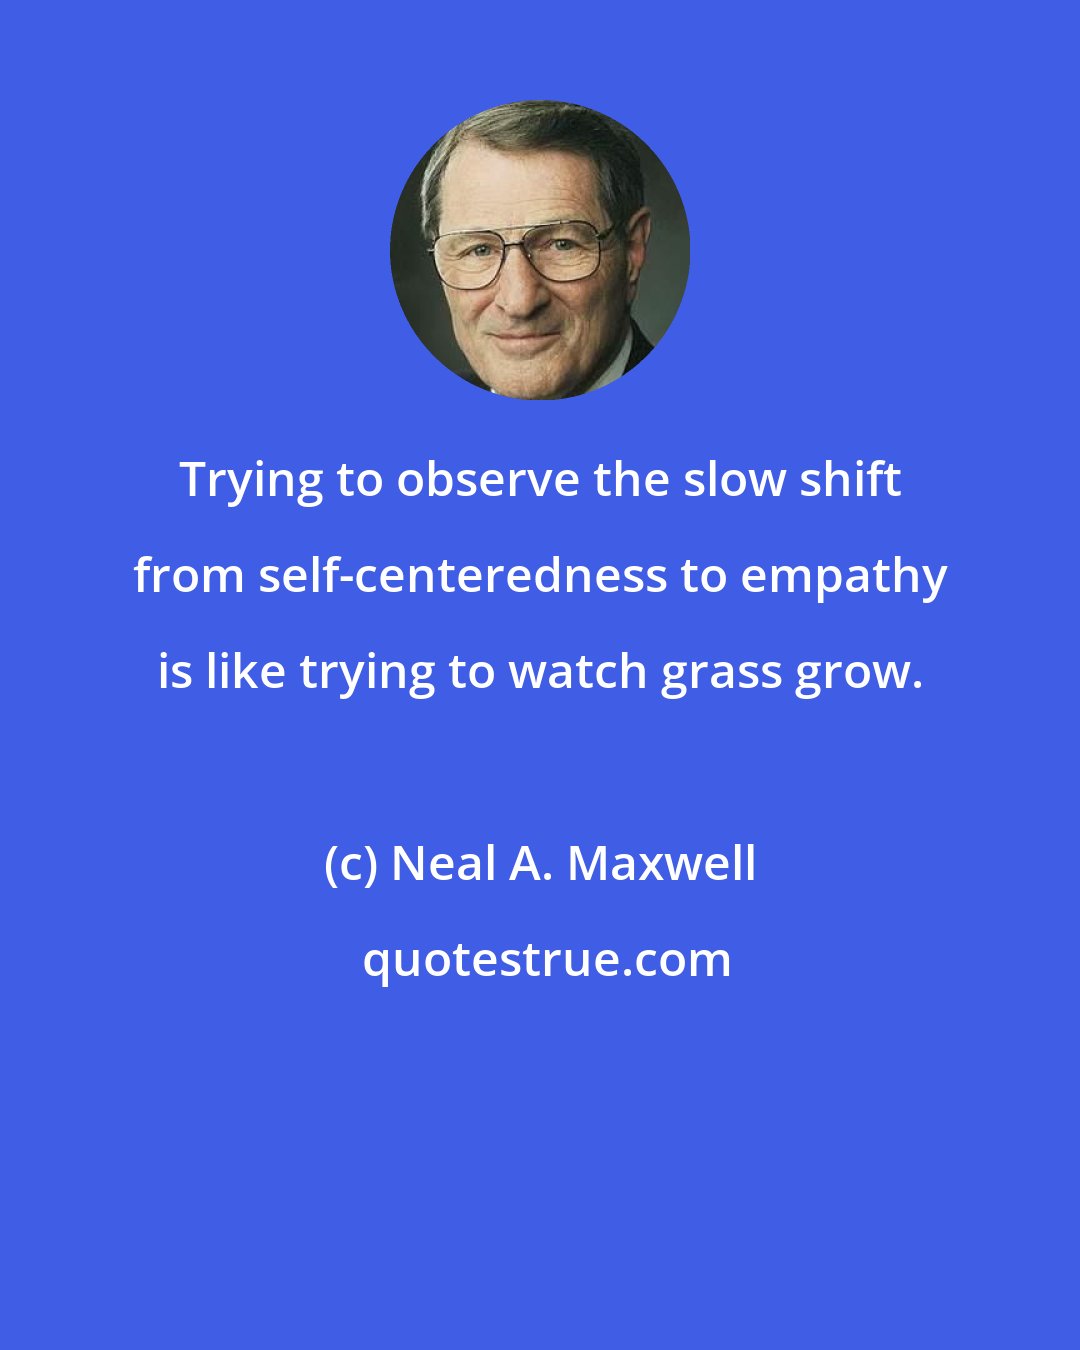 Neal A. Maxwell: Trying to observe the slow shift from self-centeredness to empathy is like trying to watch grass grow.